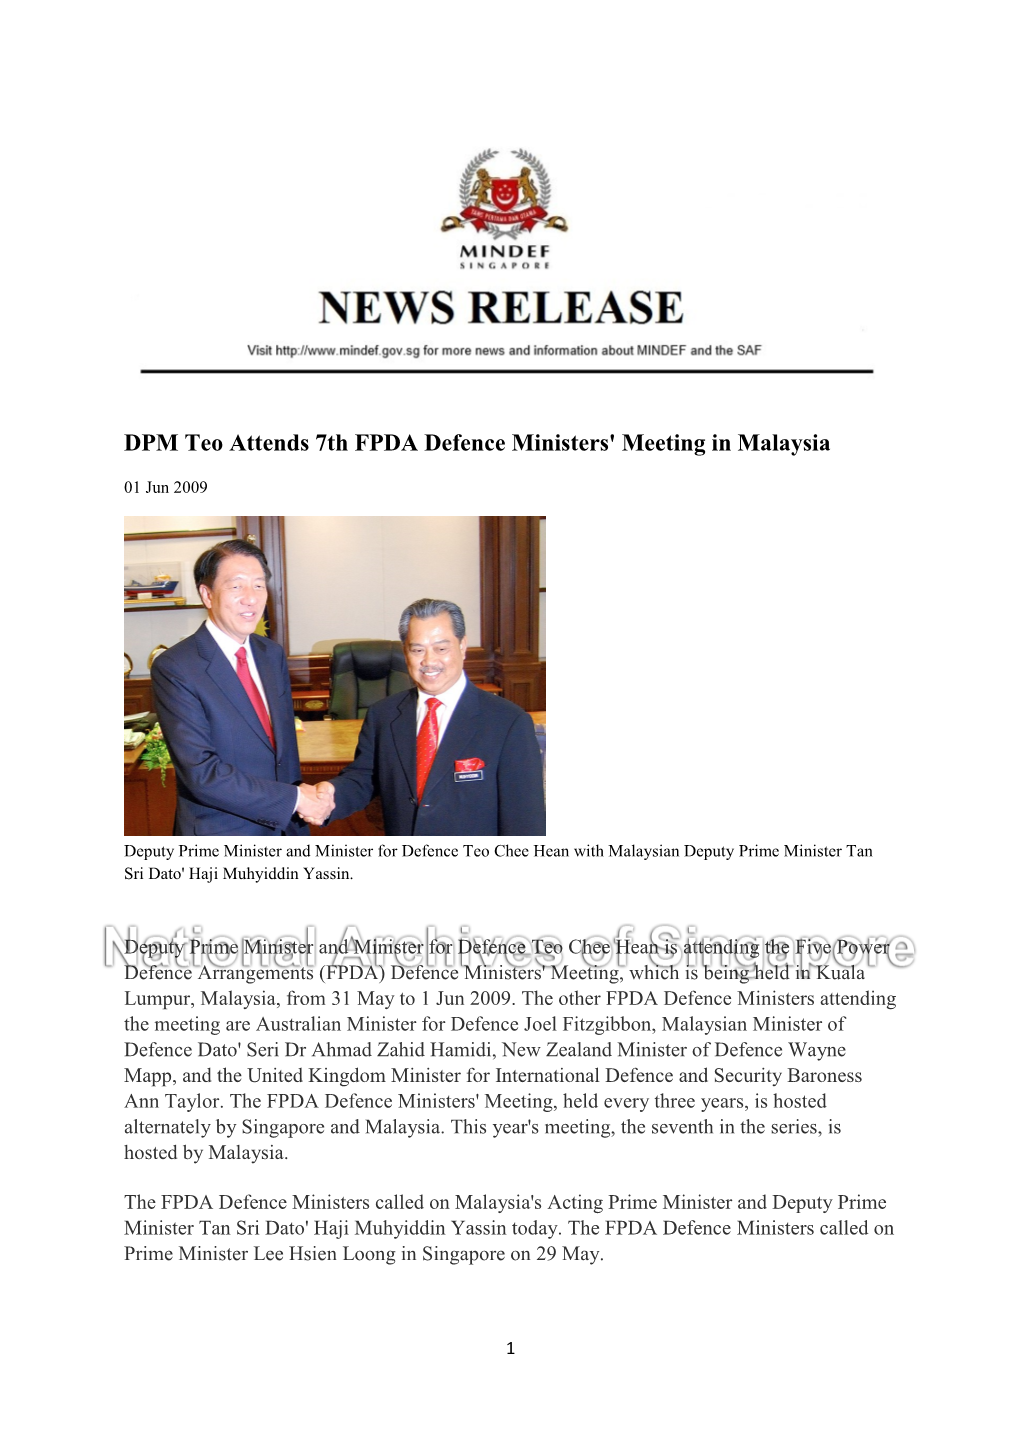 DPM Teo Attends 7Th FPDA Defence Ministers' Meeting in Malaysia